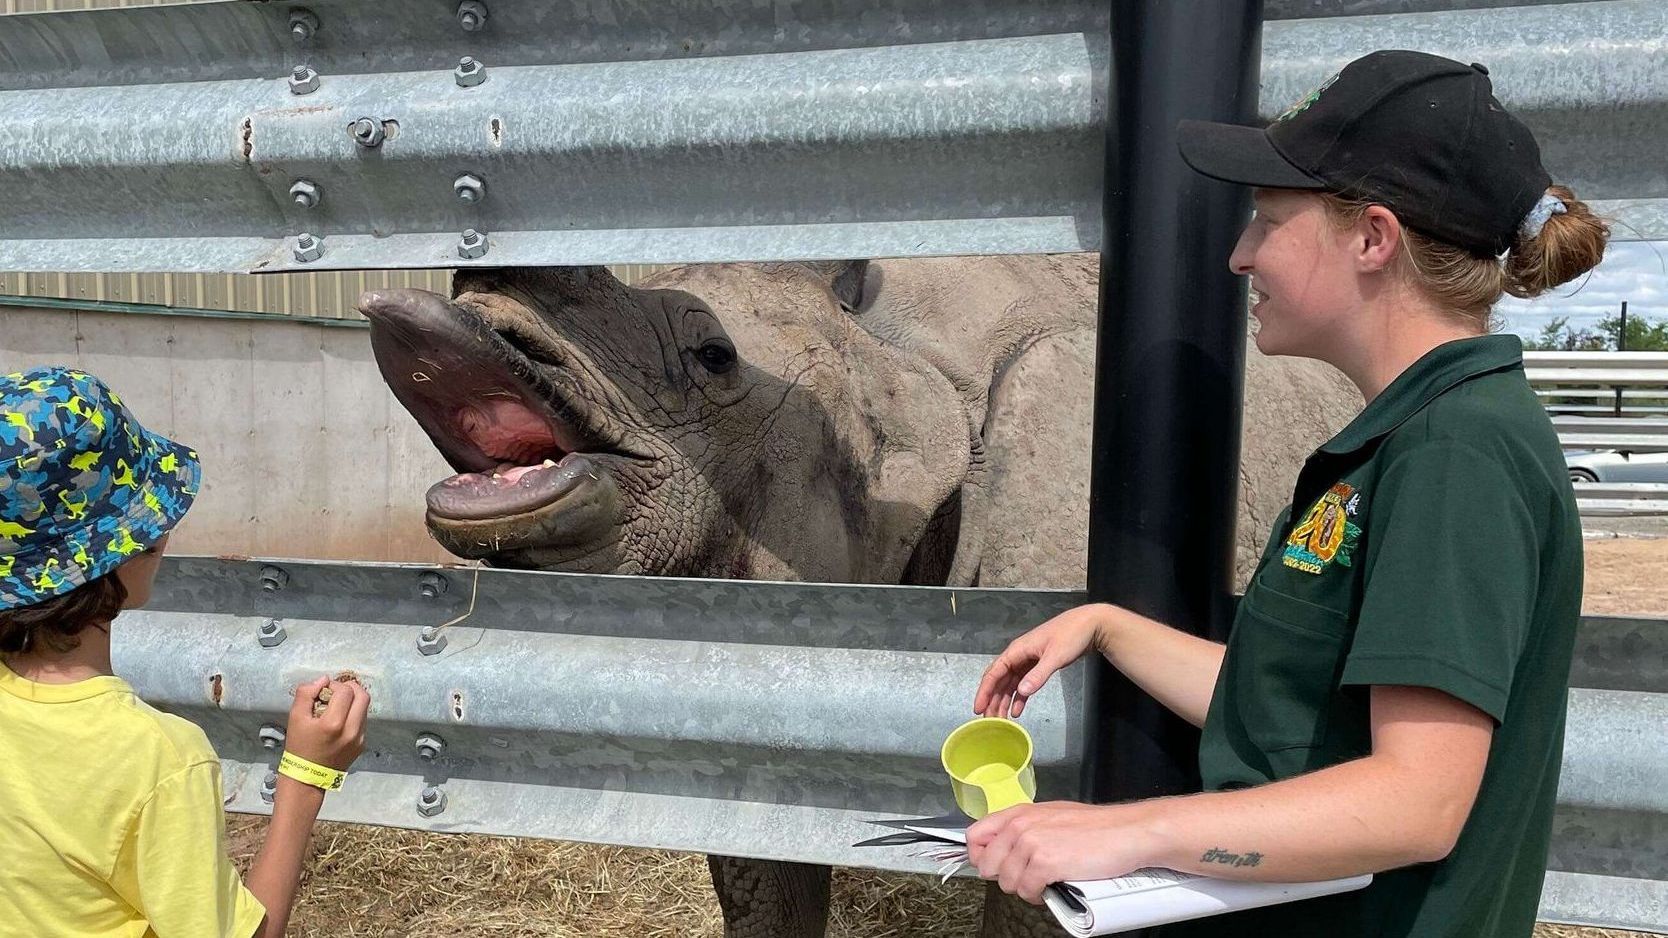 kid feeding a rhino at a behind the scenes experience in a niagara falls zoo attractions